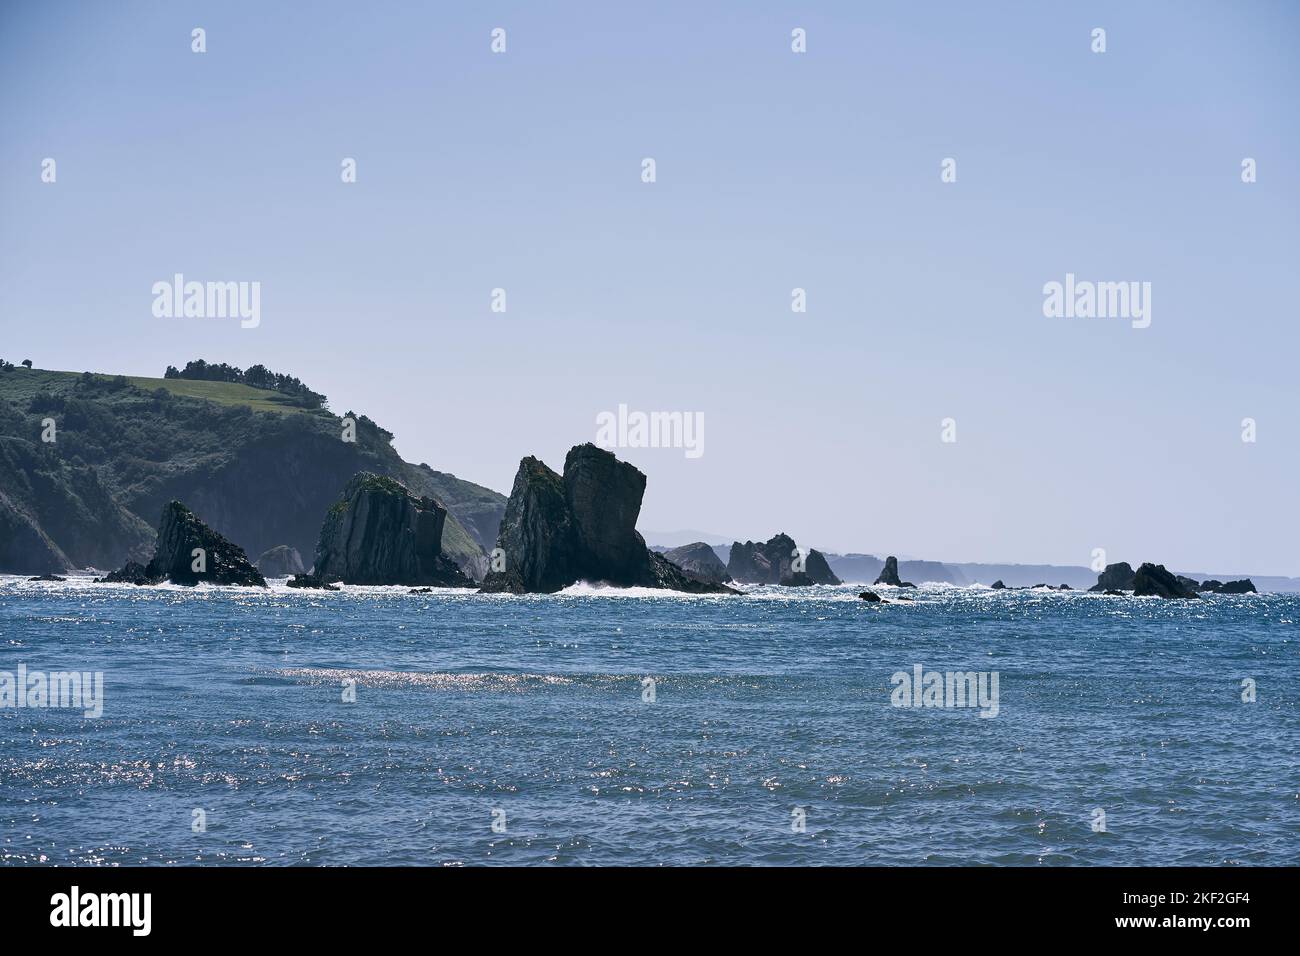 landscape of the cantabrian sea shining illuminated by the sun with big rocks near the cliffs in a calm and lonely place, asturias, spain Stock Photo